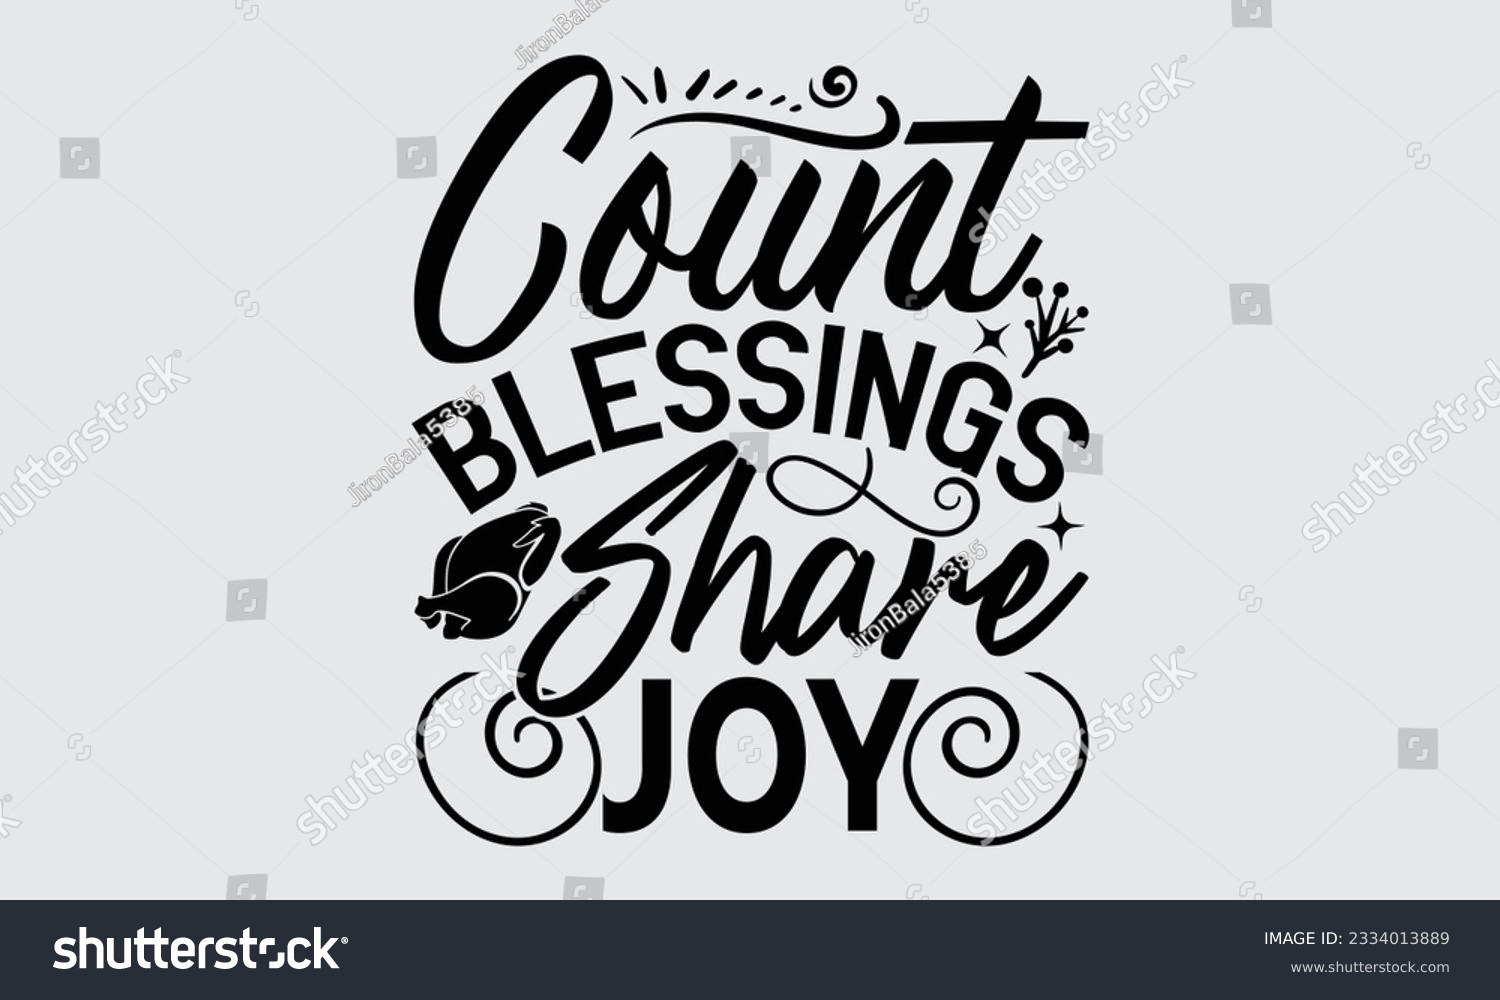 SVG of Count Blessings Share Joy - Thanksgiving svg typography t-shirt design, this illustration can be used as a print on Stickers, Templates, and bags, stationary or as a poster.
 svg